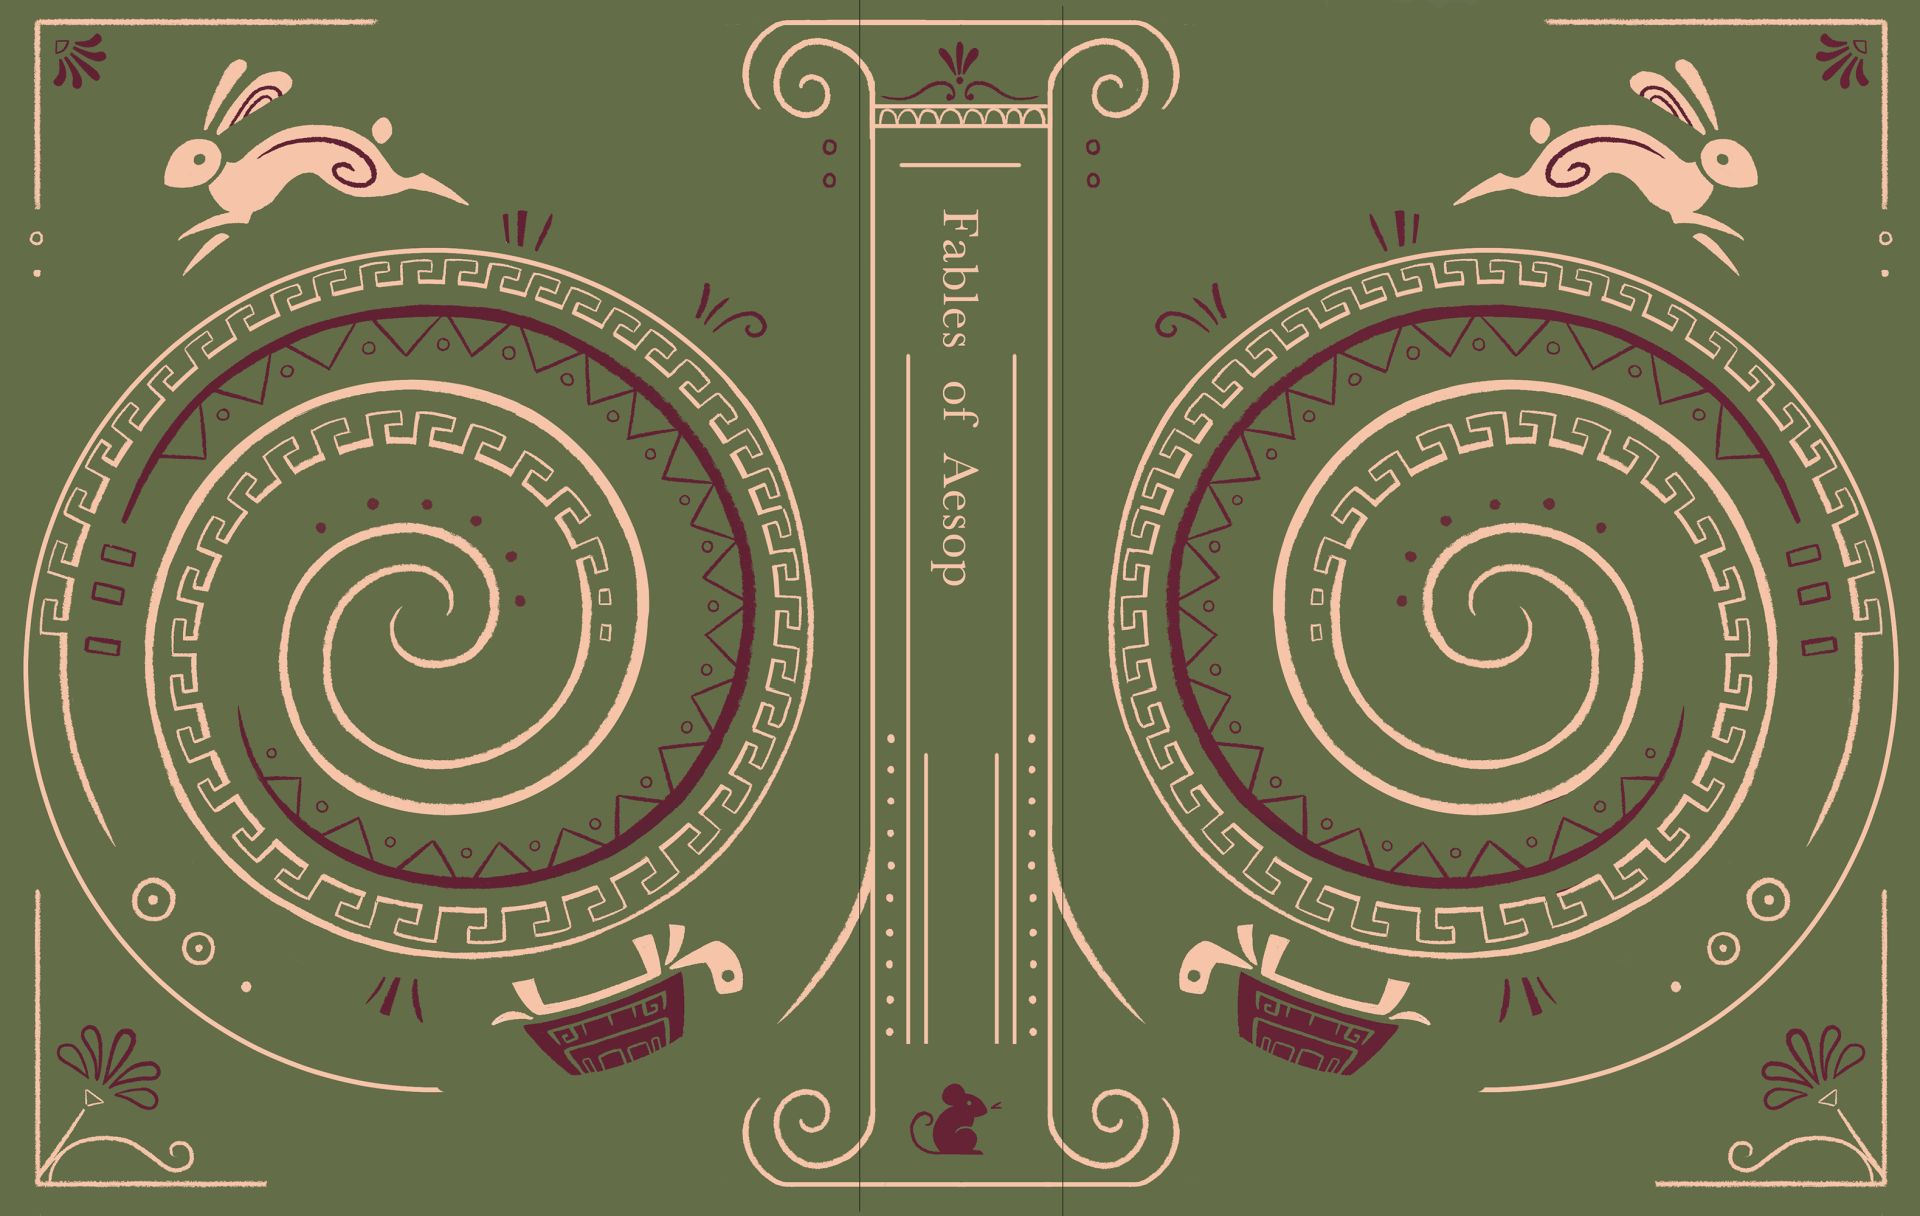 Image shows a green book cover spread, titled 'Fables of Aesop' on the spine. Each page is decorated with a spiral, with a hare and a tortoise running around it. The spirals have greek patterns incorporated into them, and the shape of a greek pillar surrounds the spine.